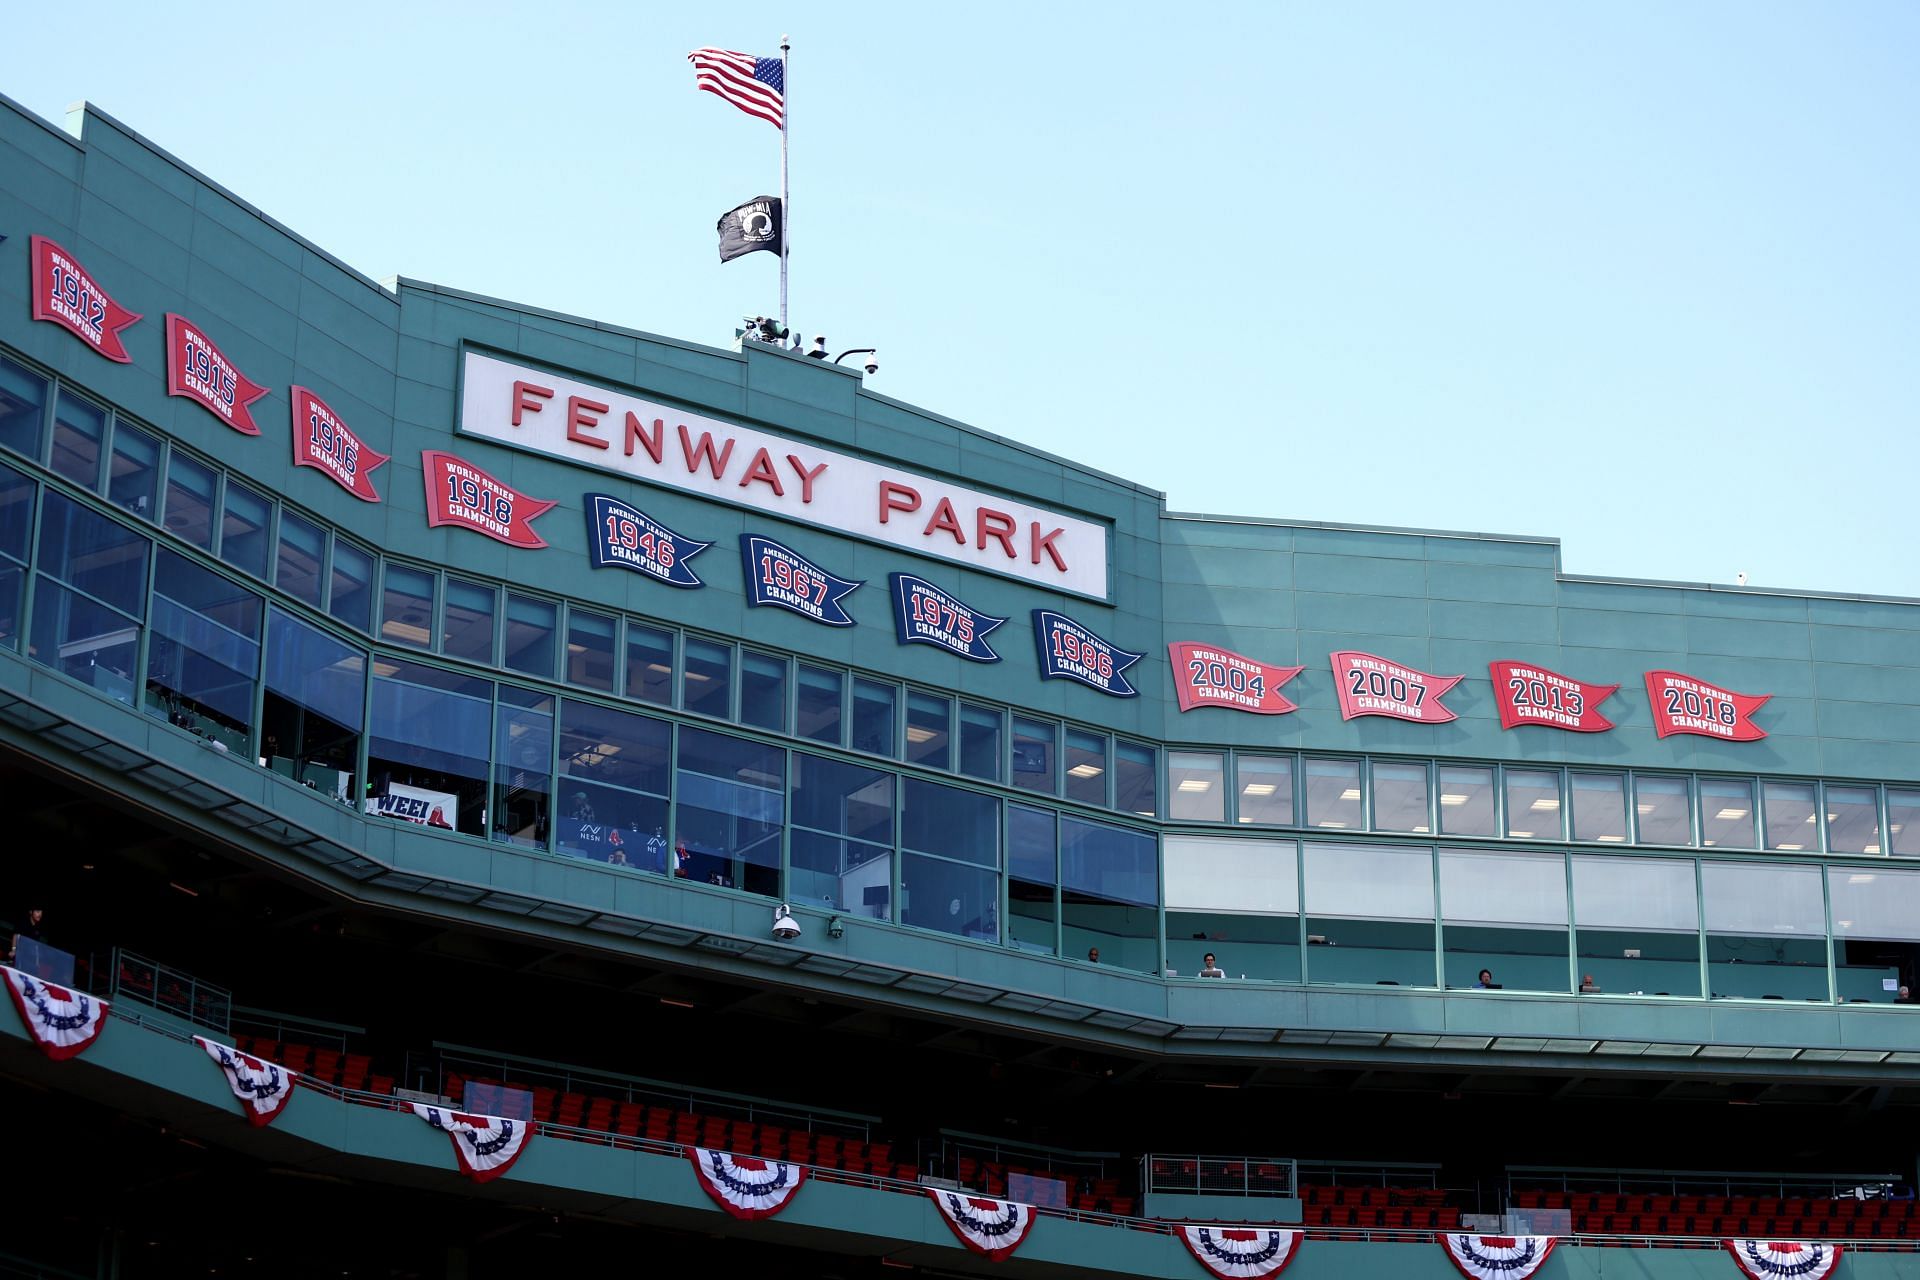 A view of the Fenway Park grandstand